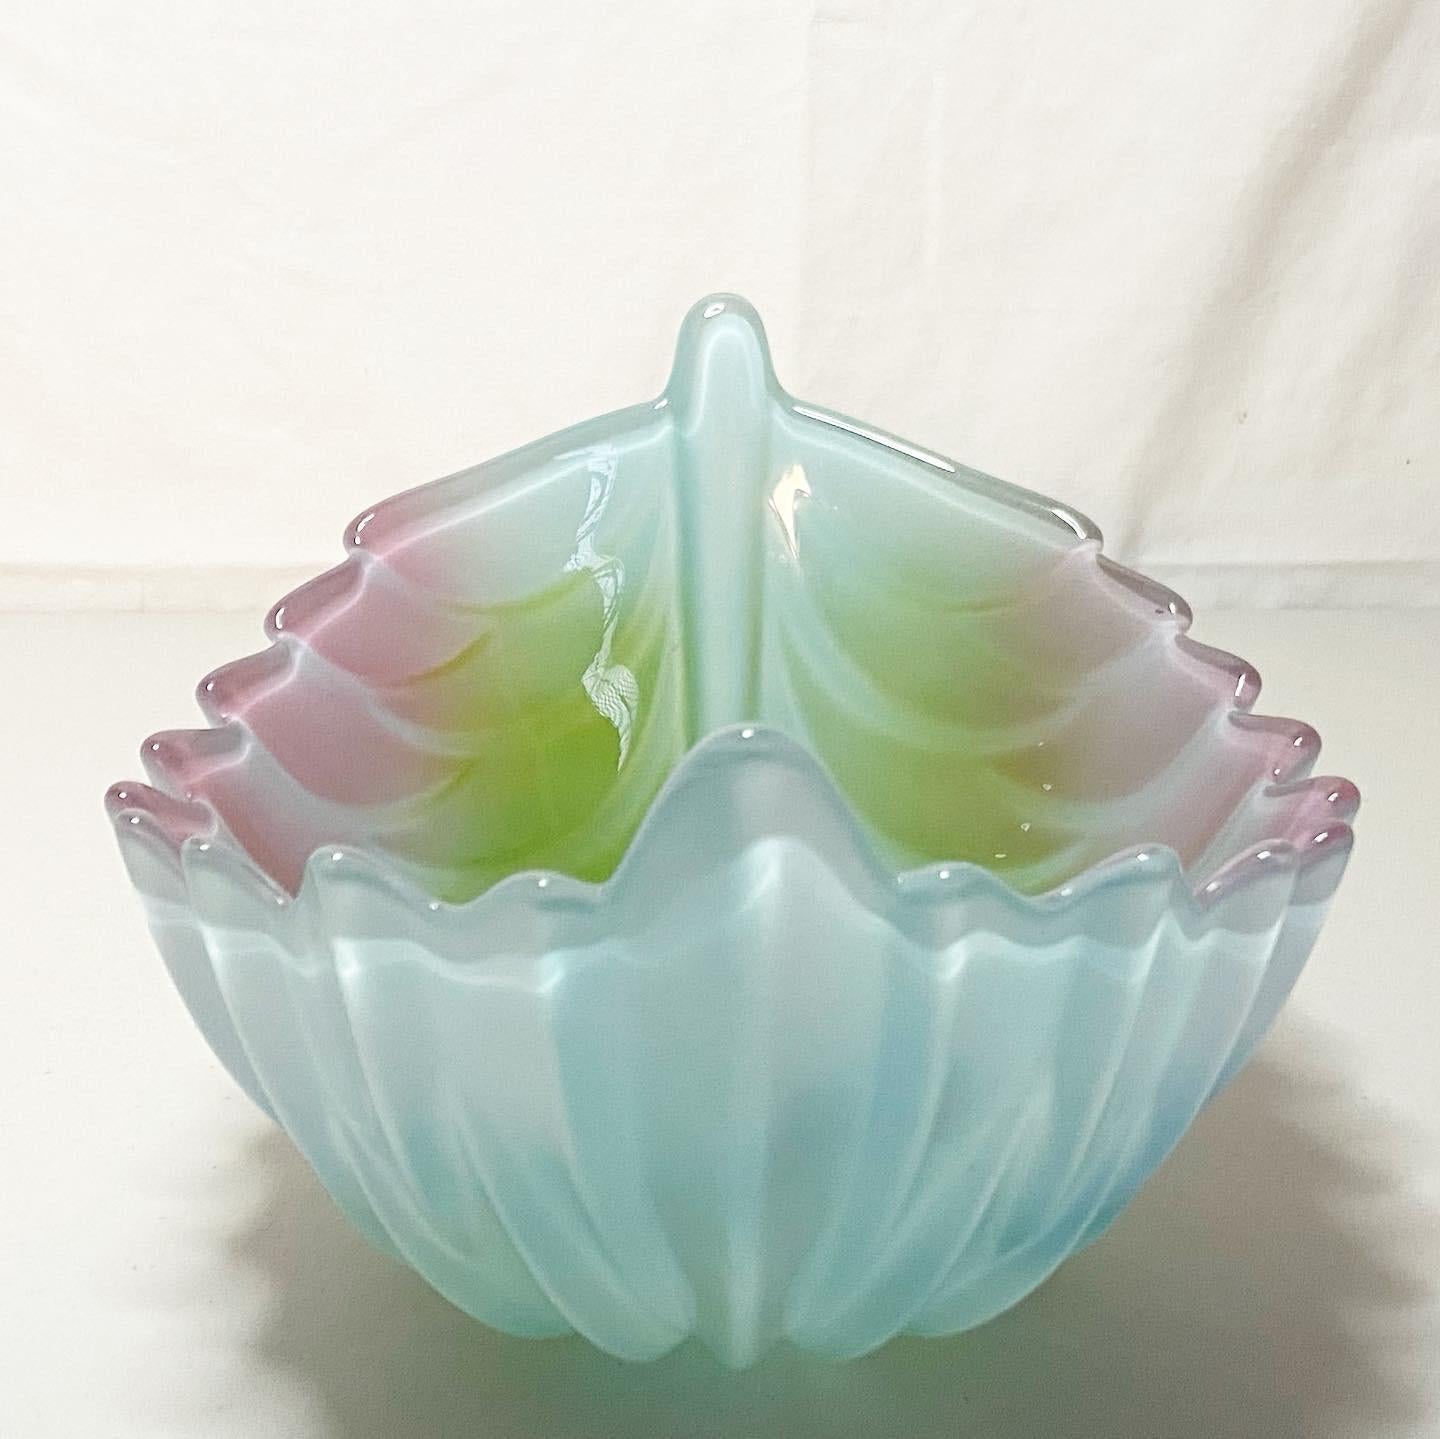 1980s Decorative Glass Leaf Serving Bowl In Good Condition For Sale In Delray Beach, FL